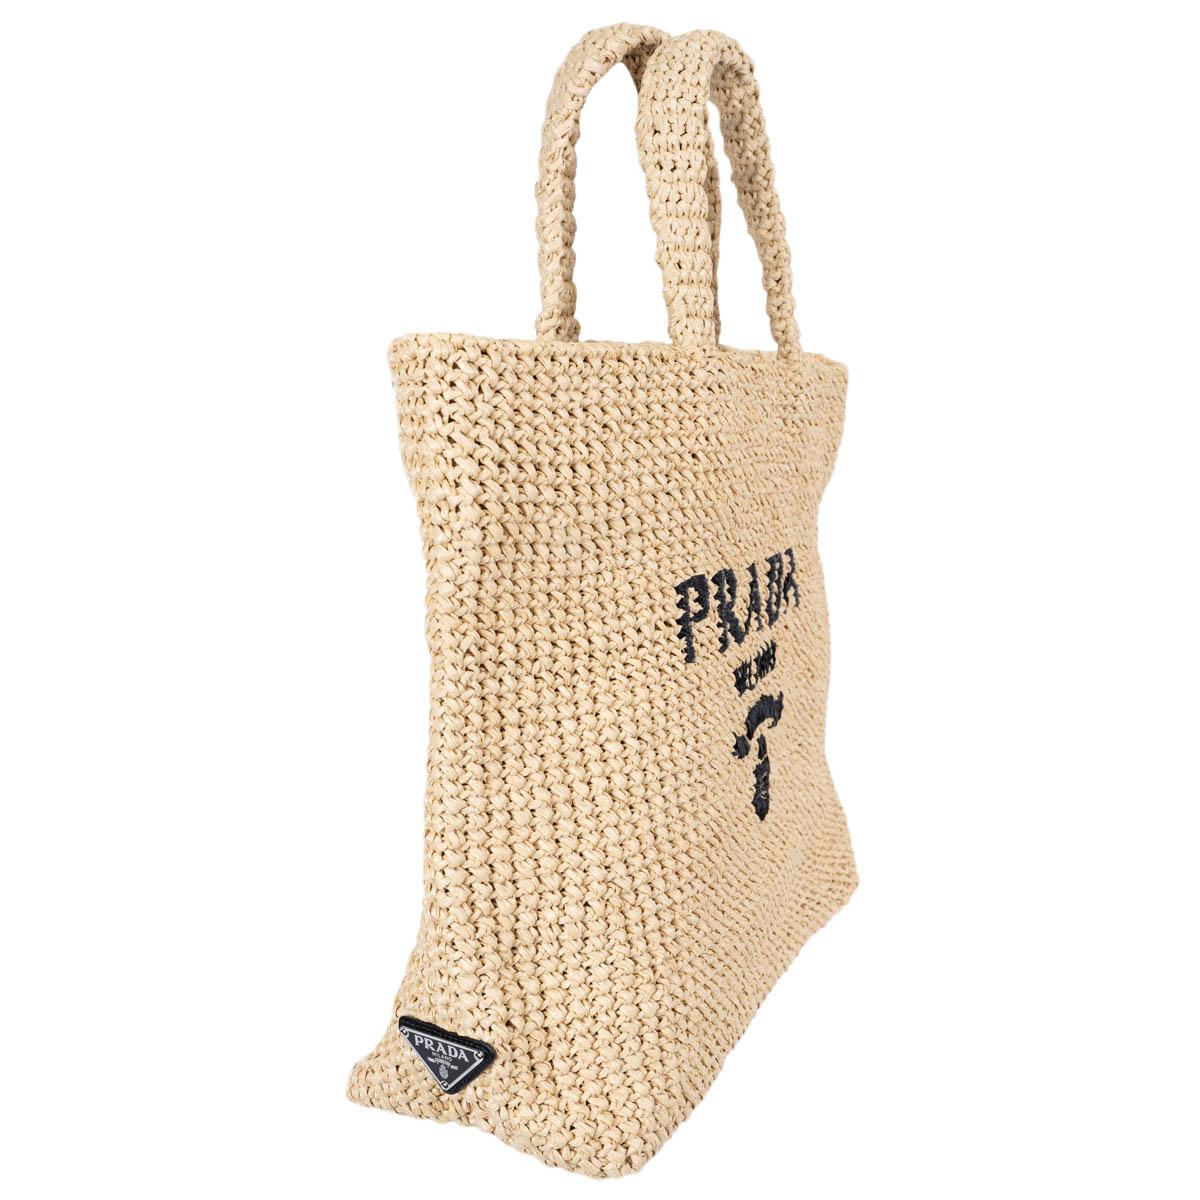 100% authentic Prada Logo crochet large tote bag with a soft, deconstructed design is made of raffia-effect yarn. The design features embroidered iconic lettering logo on the front and enameled metal triangle logo on the side. Unlined. Brand new.